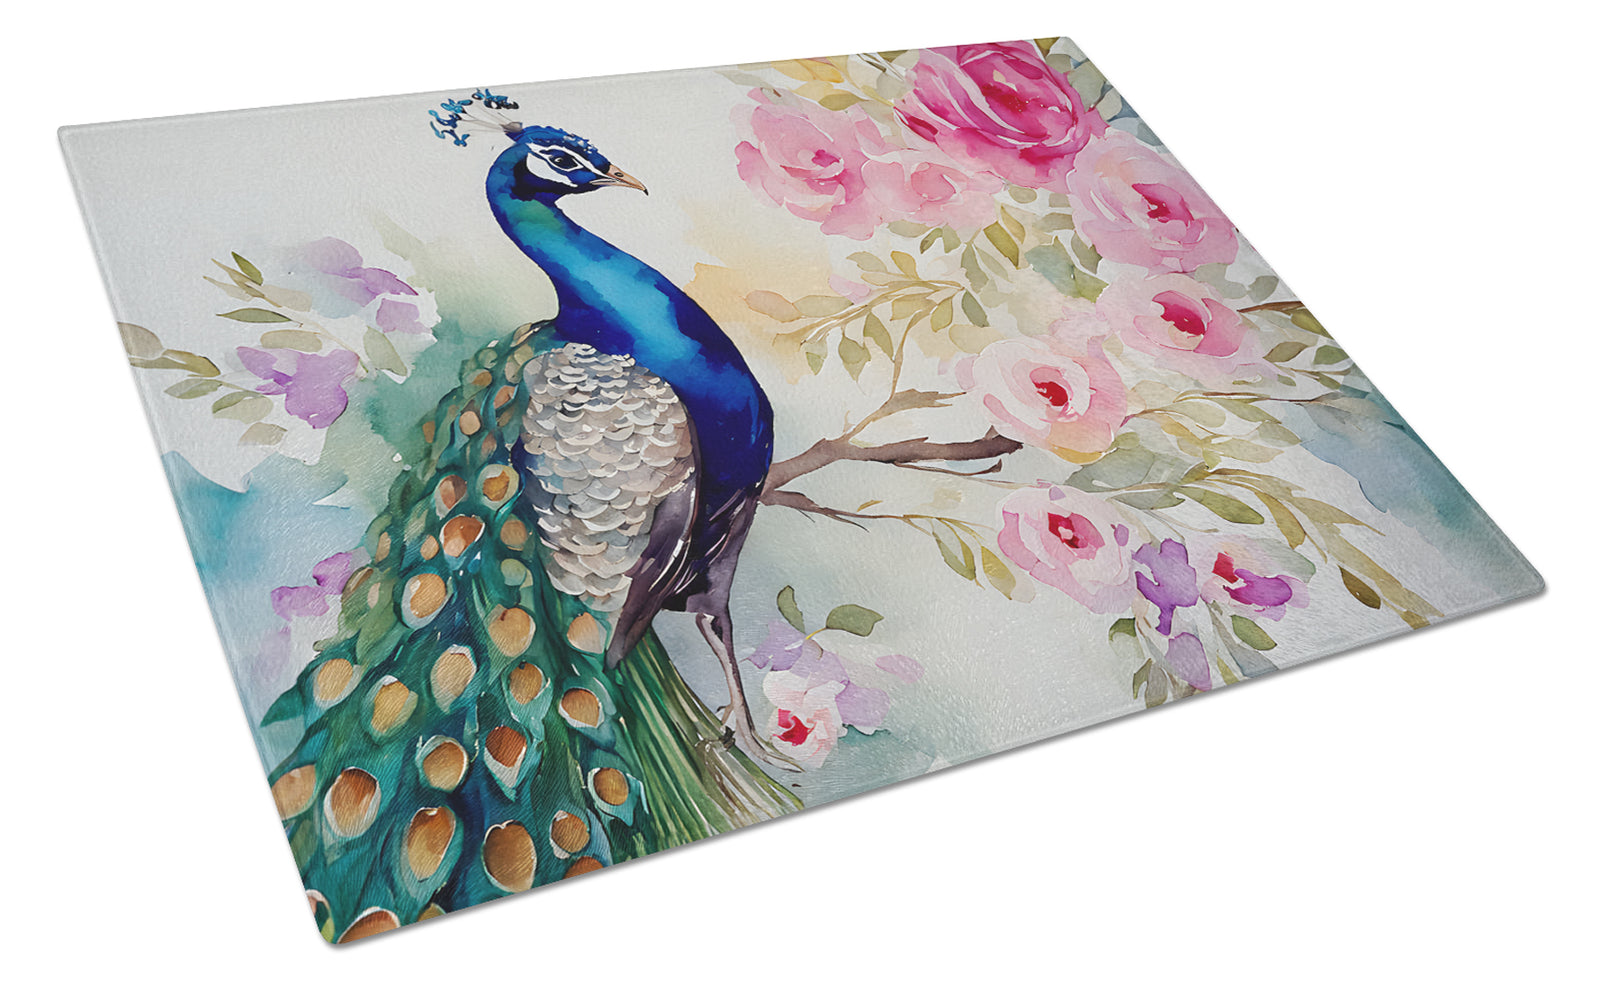 Buy this Peacock Glass Cutting Board